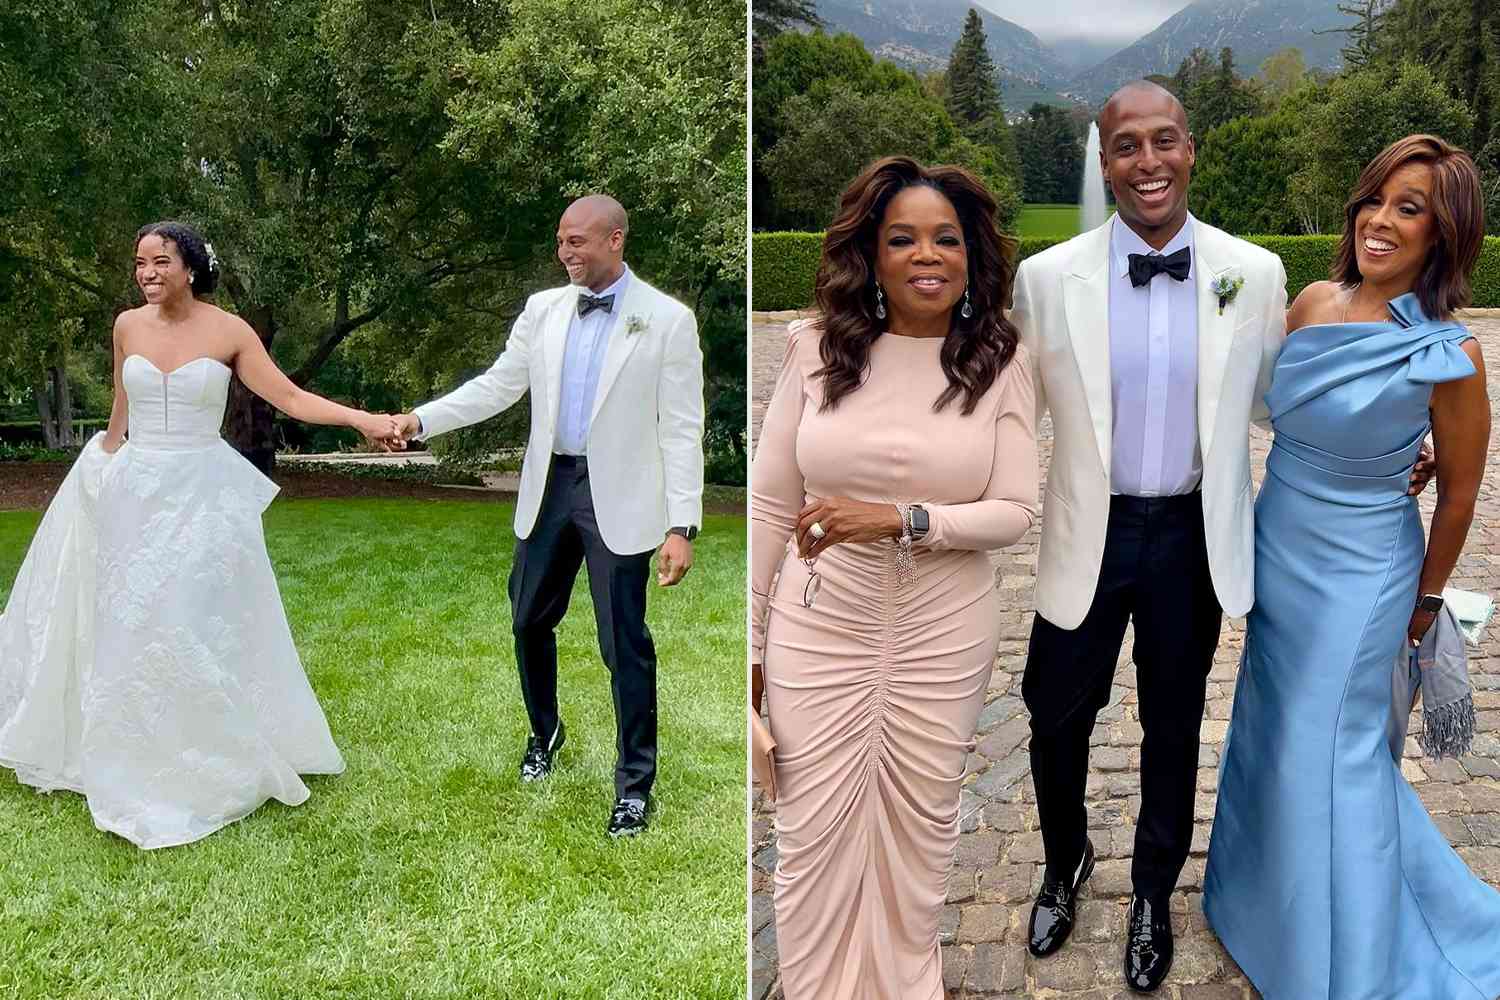 Gayle King Shares Candid Photos from Son William Bumpus Jr.'s ‘Spectacular Family Wedding’ at Oprah's House